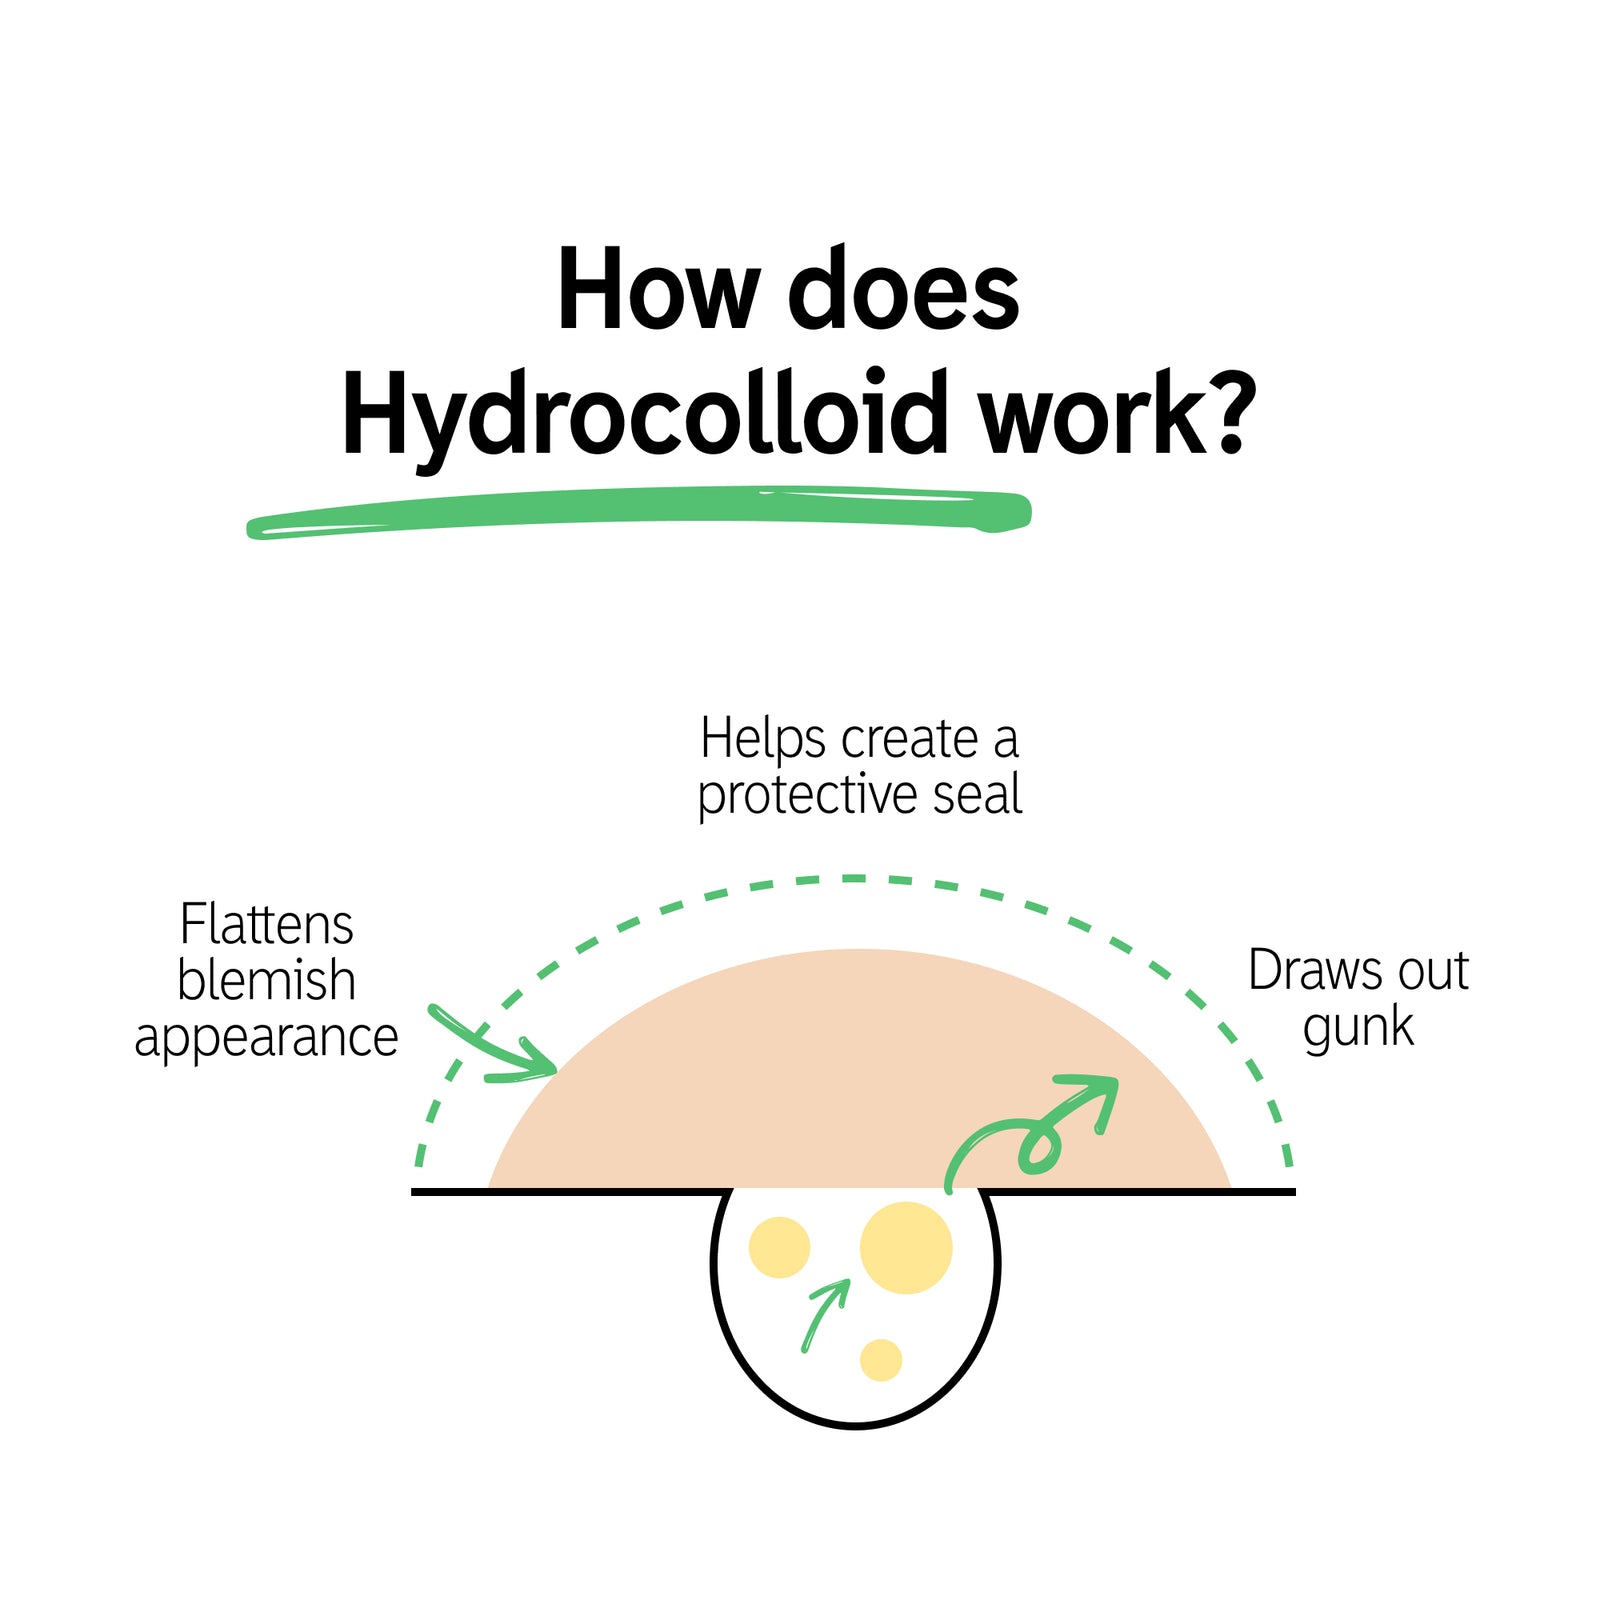 Infographic: How does Hydrocolloid work? Flattens blemish appearance, helps create a protective seal, draws out gunk